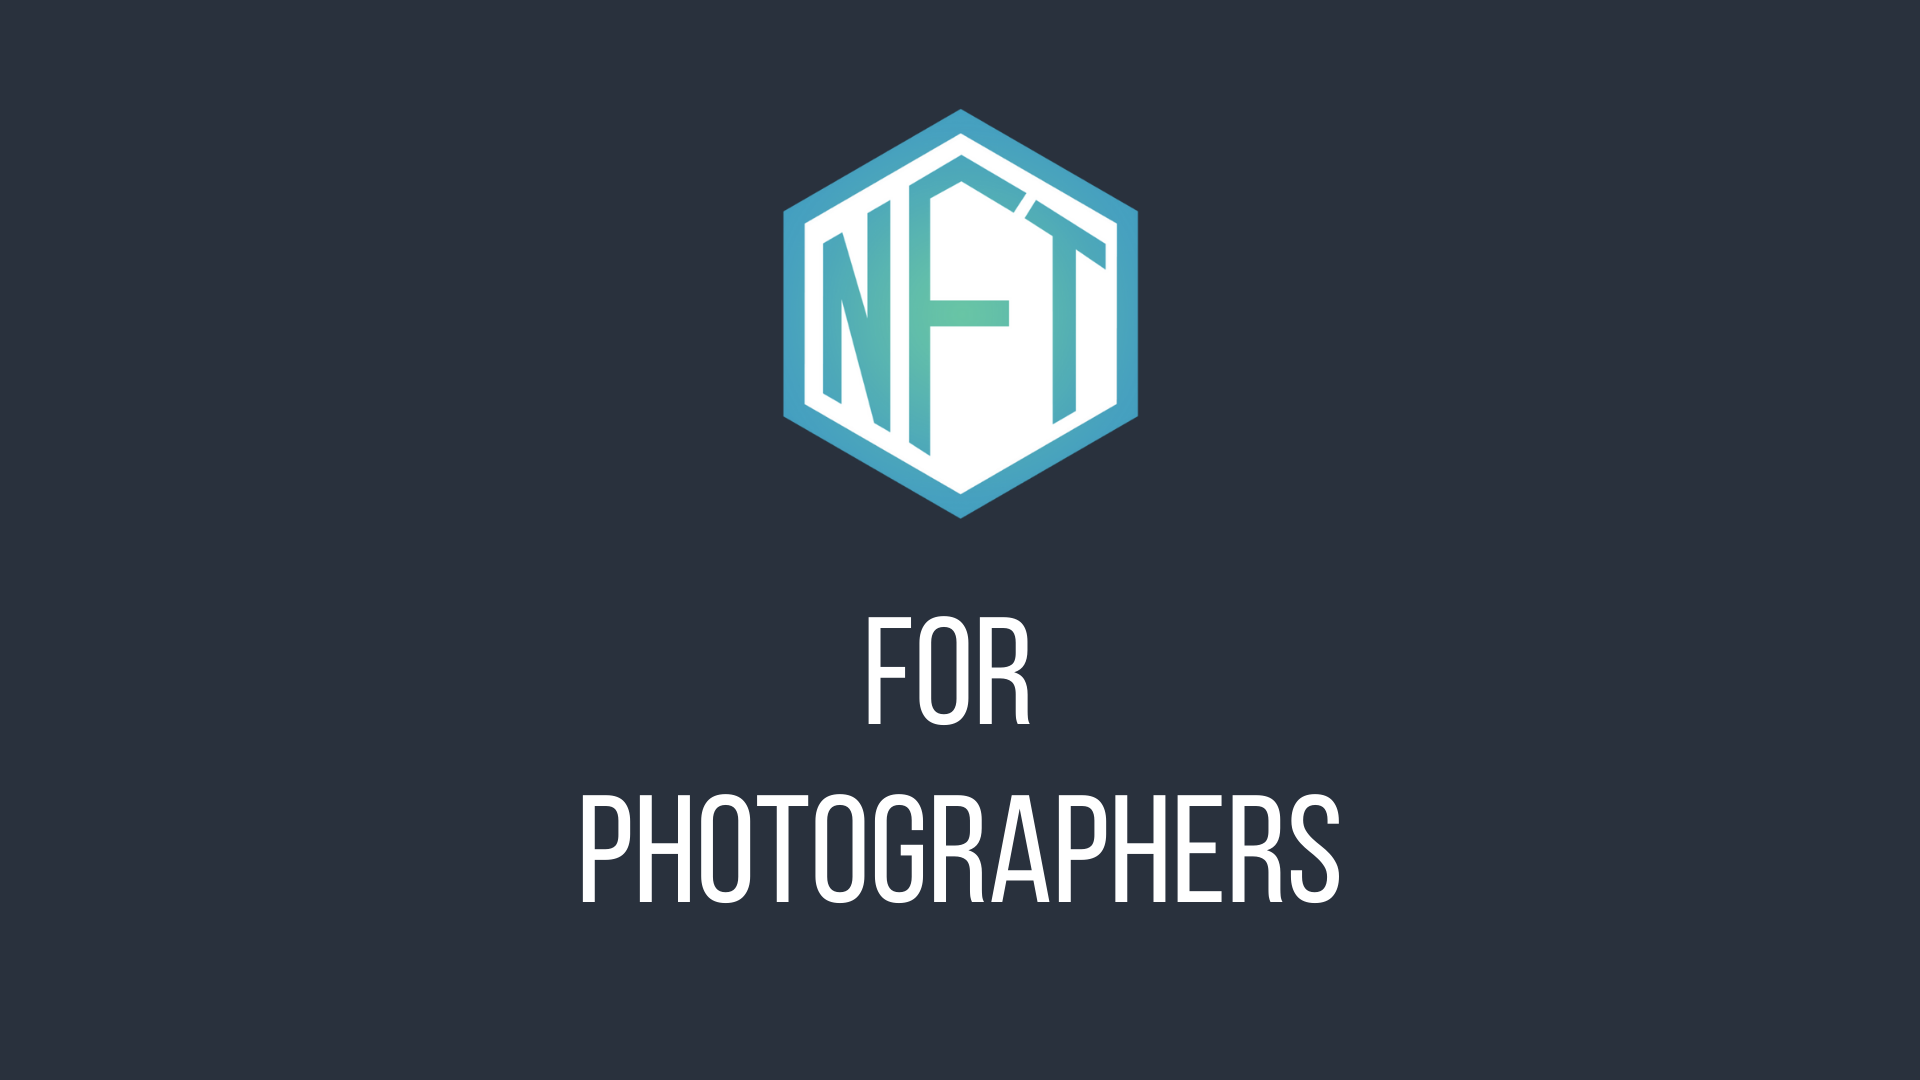 What Is NFT For Photographers